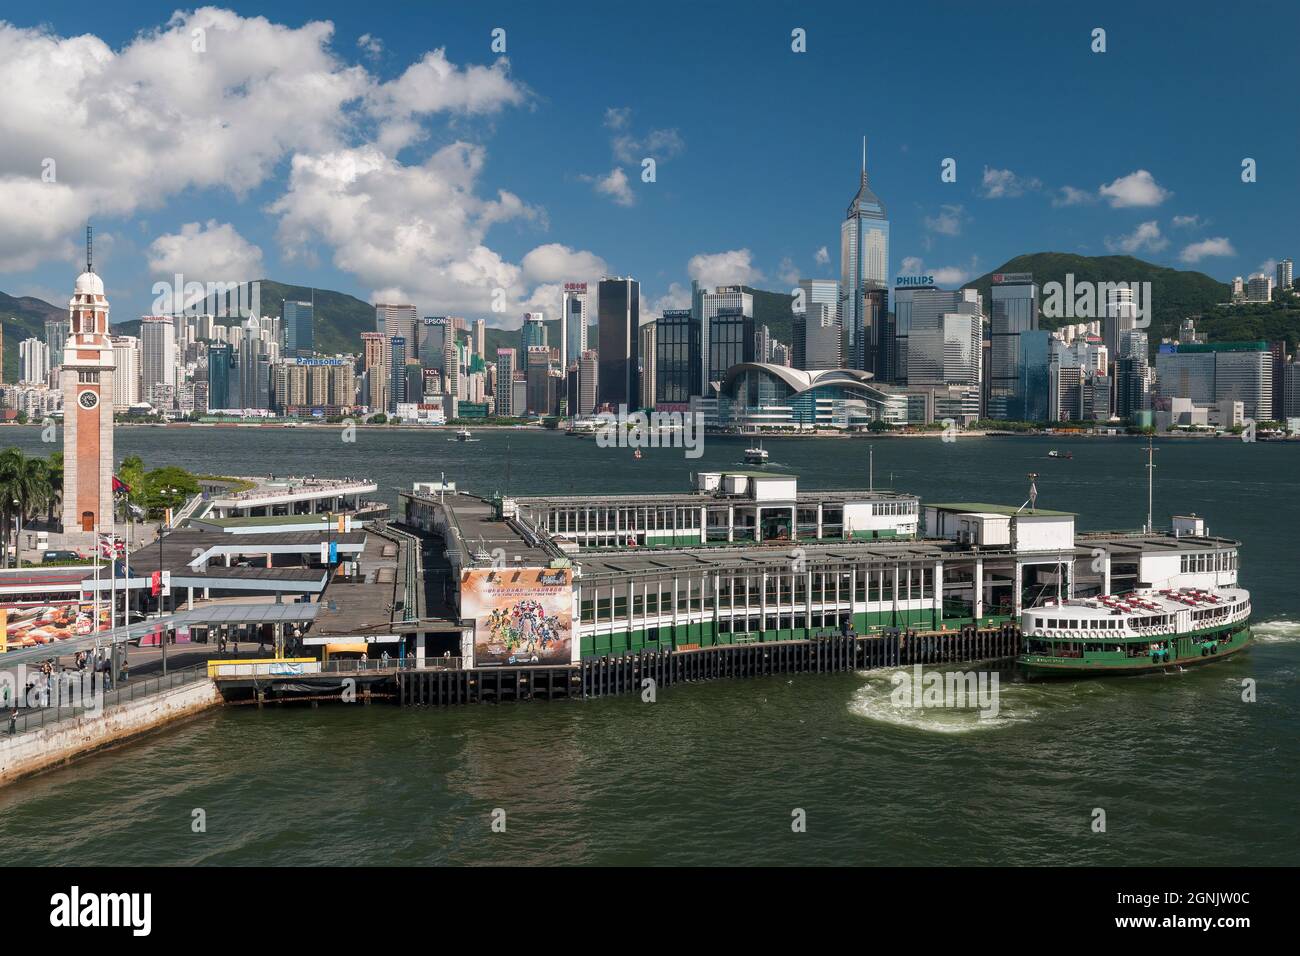 A Star Ferry arrives at Tsim Sha Tsui pier in Kowloon, with Wan Chai and Causeway Bay, Hong Kong Island, visible across Victoria Harbour Stock Photo